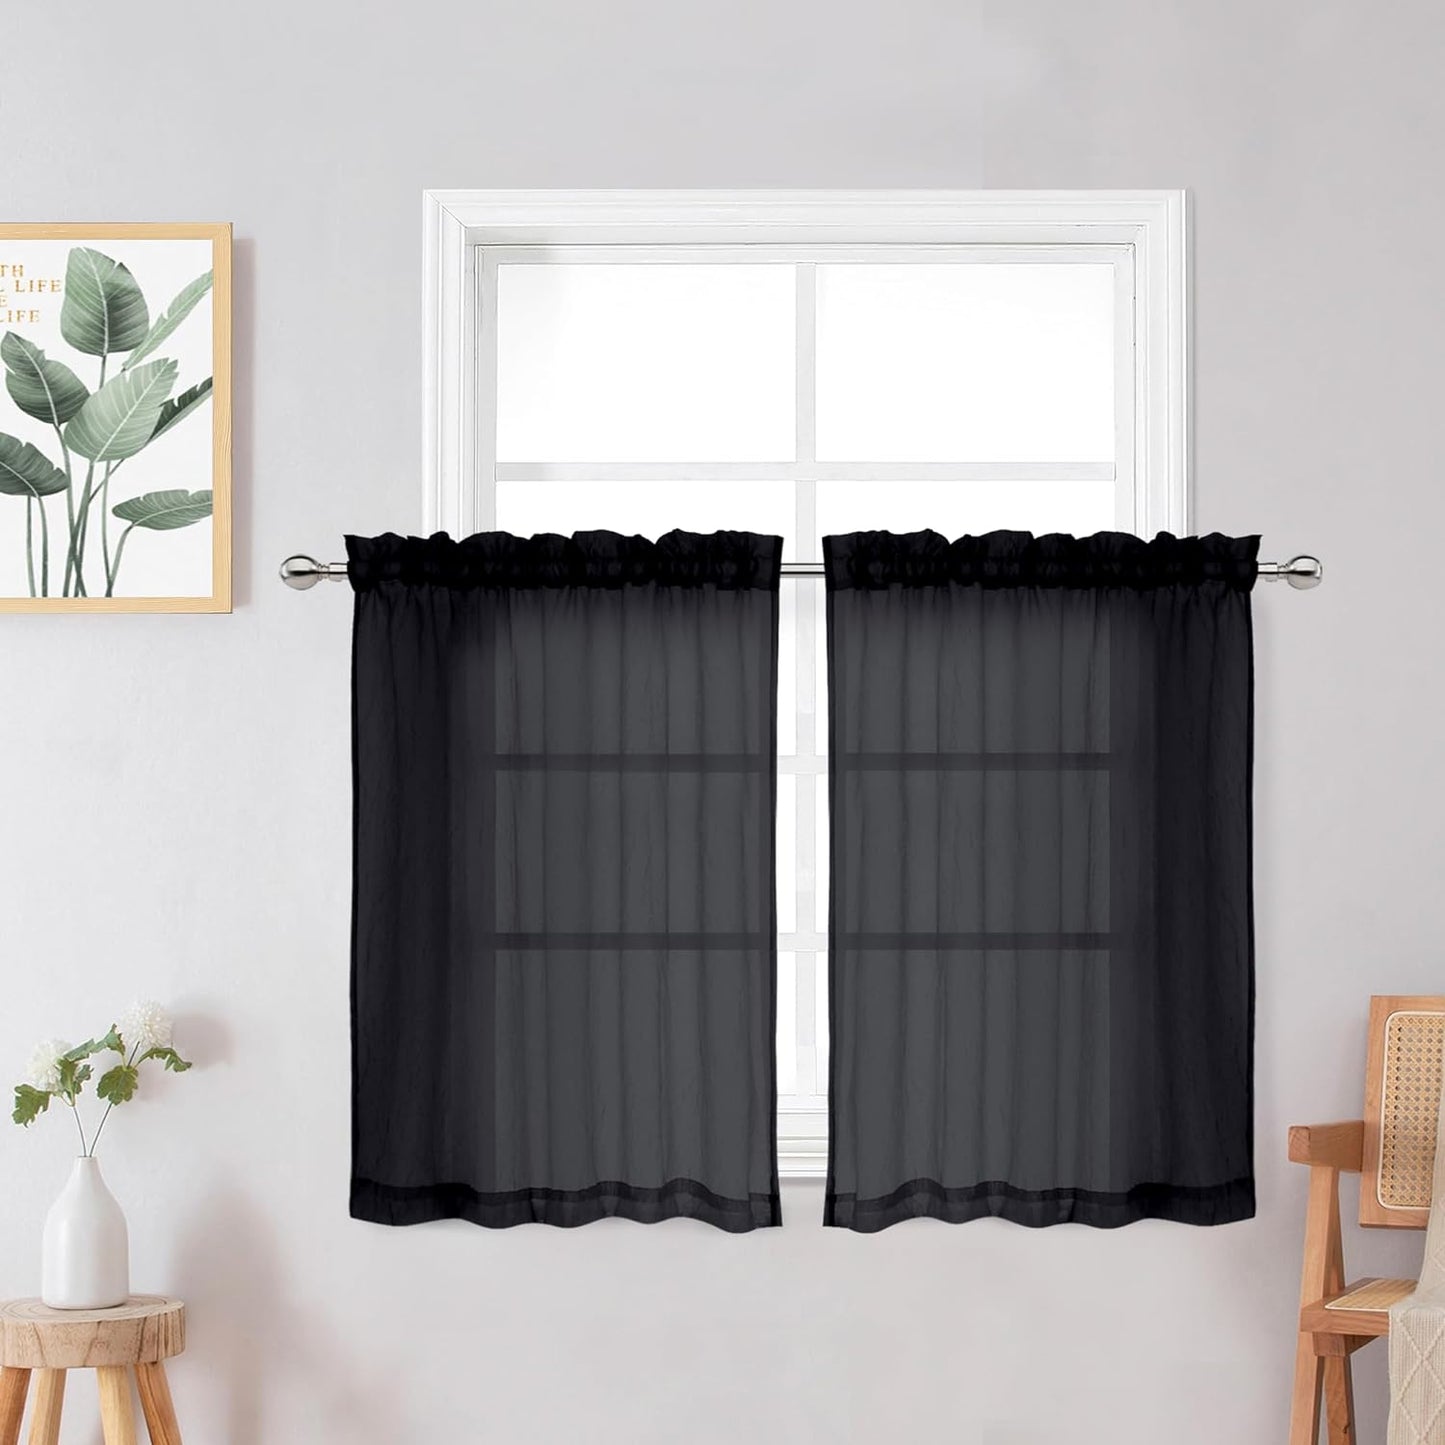 Chyhomenyc Crushed White Sheer Valances for Window 14 Inch Length 2 PCS, Crinkle Voile Short Kitchen Curtains with Dual Rod Pockets，Gauzy Bedroom Curtain Valance，Each 42Wx14L Inches  Chyhomenyc Black 28 W X 24 L 